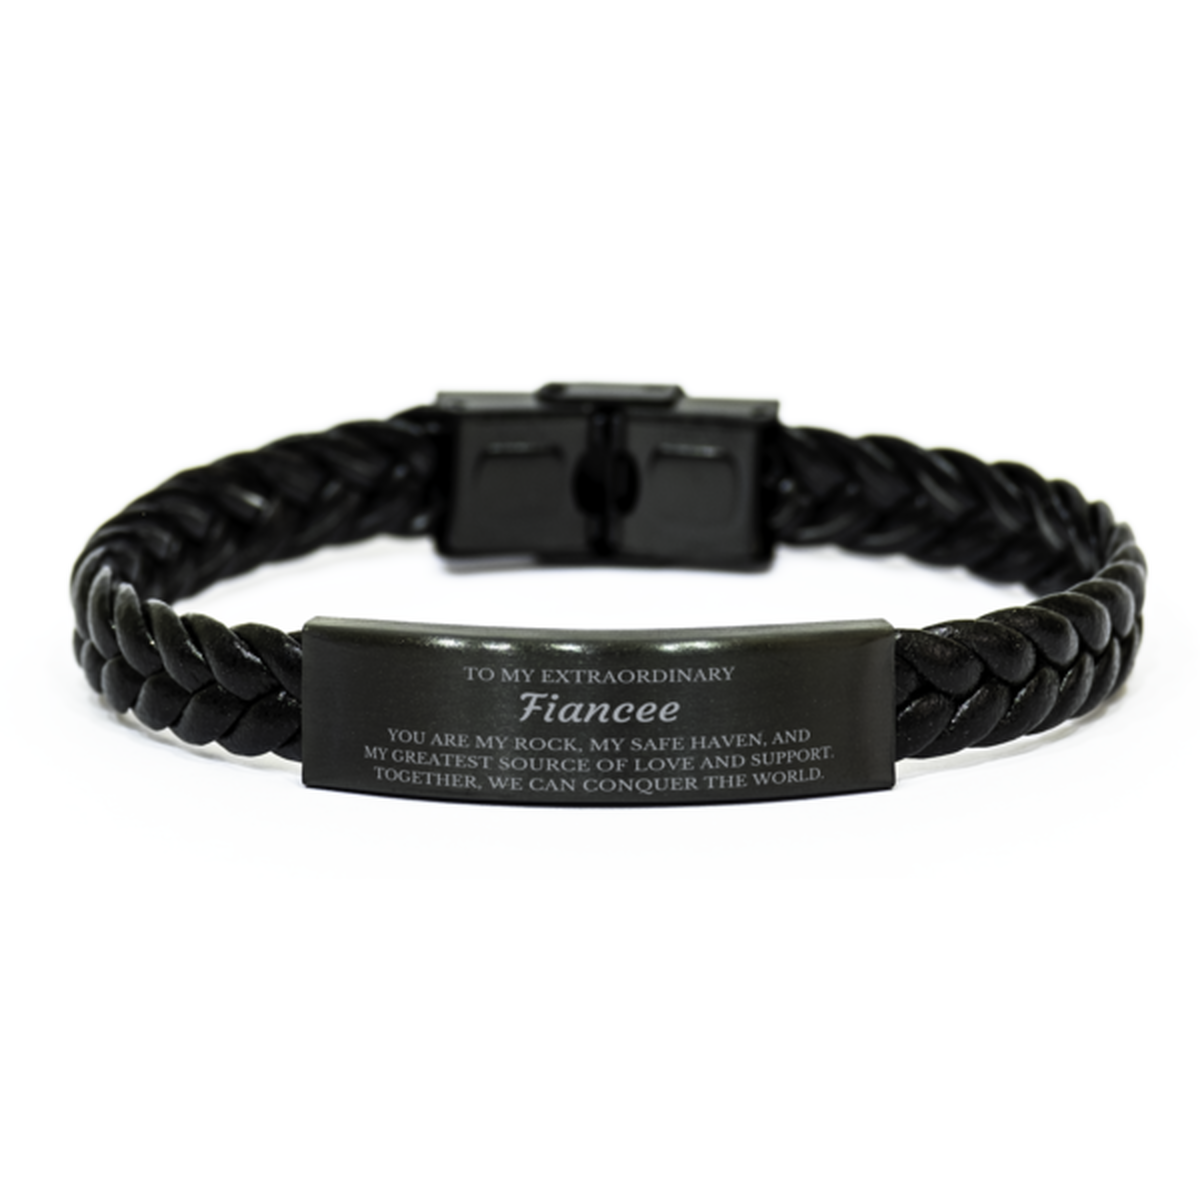 To My Extraordinary Fiancee Gifts, Together, we can conquer the world, Birthday Braided Leather Bracelet For Fiancee, Christmas Gifts For Fiancee